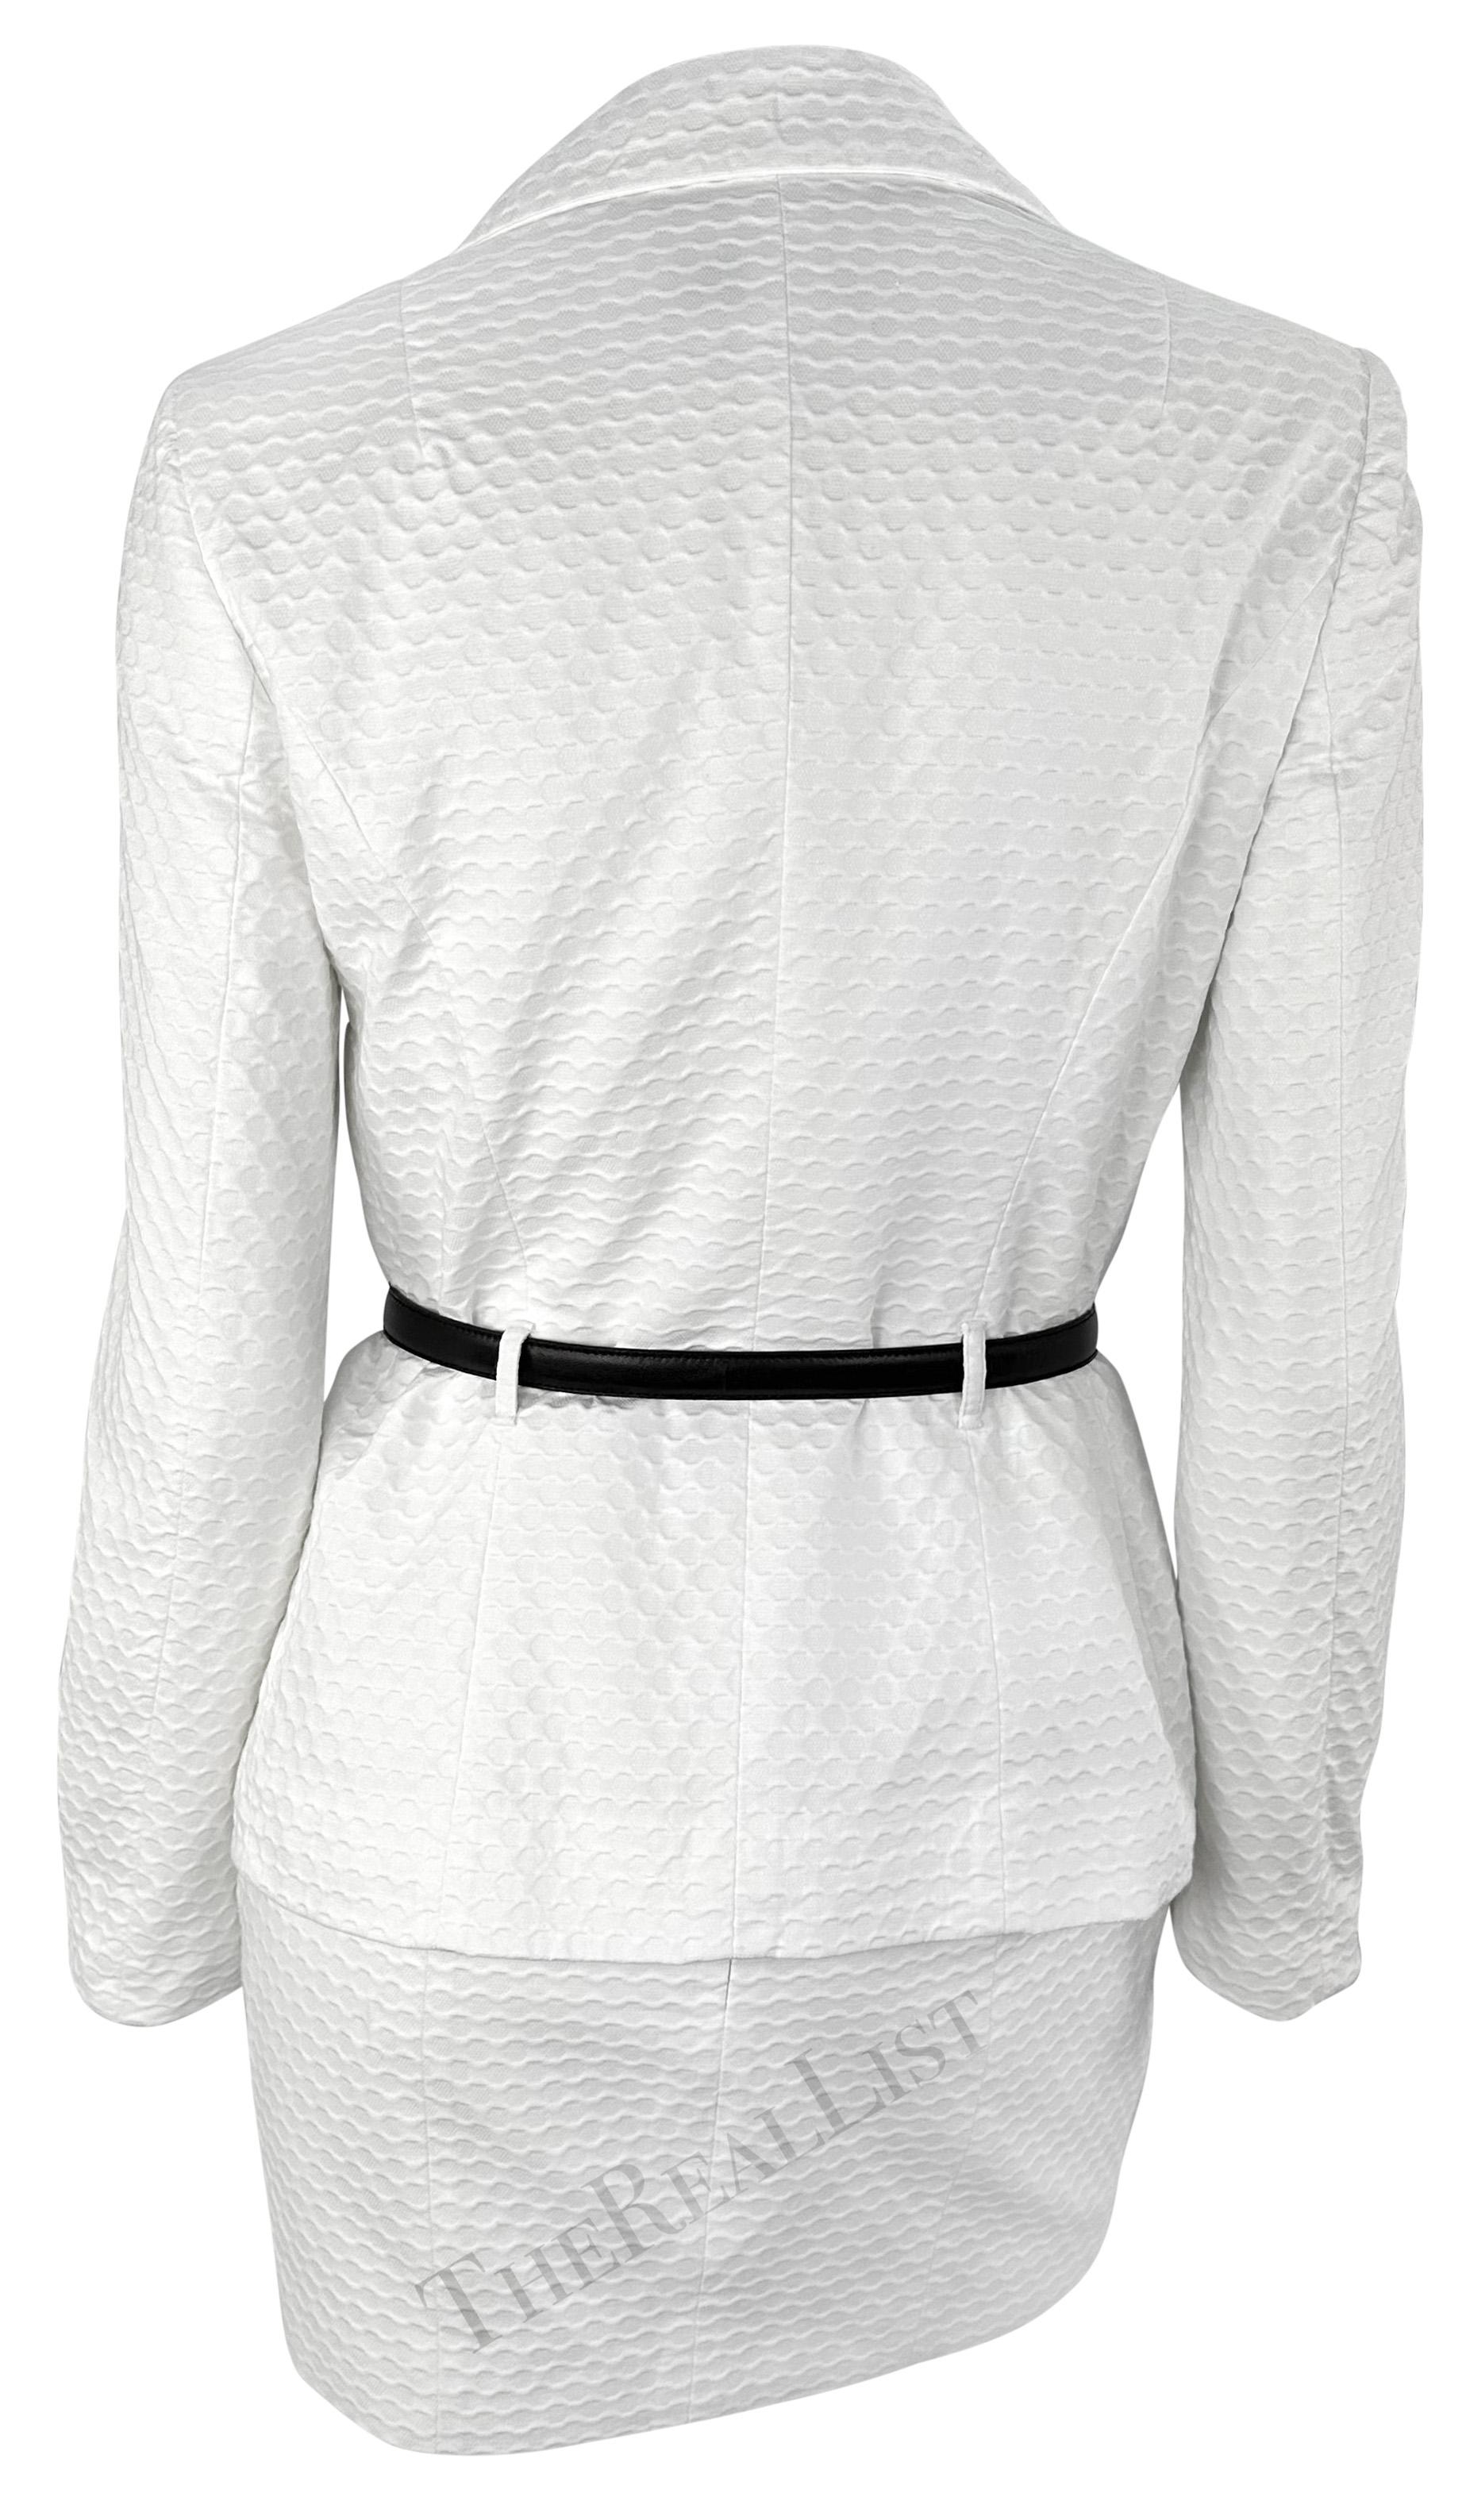 S/S 1995 Dolce & Gabbana Belted White Waffle Knit Mini Skirt Suit For Sale 1